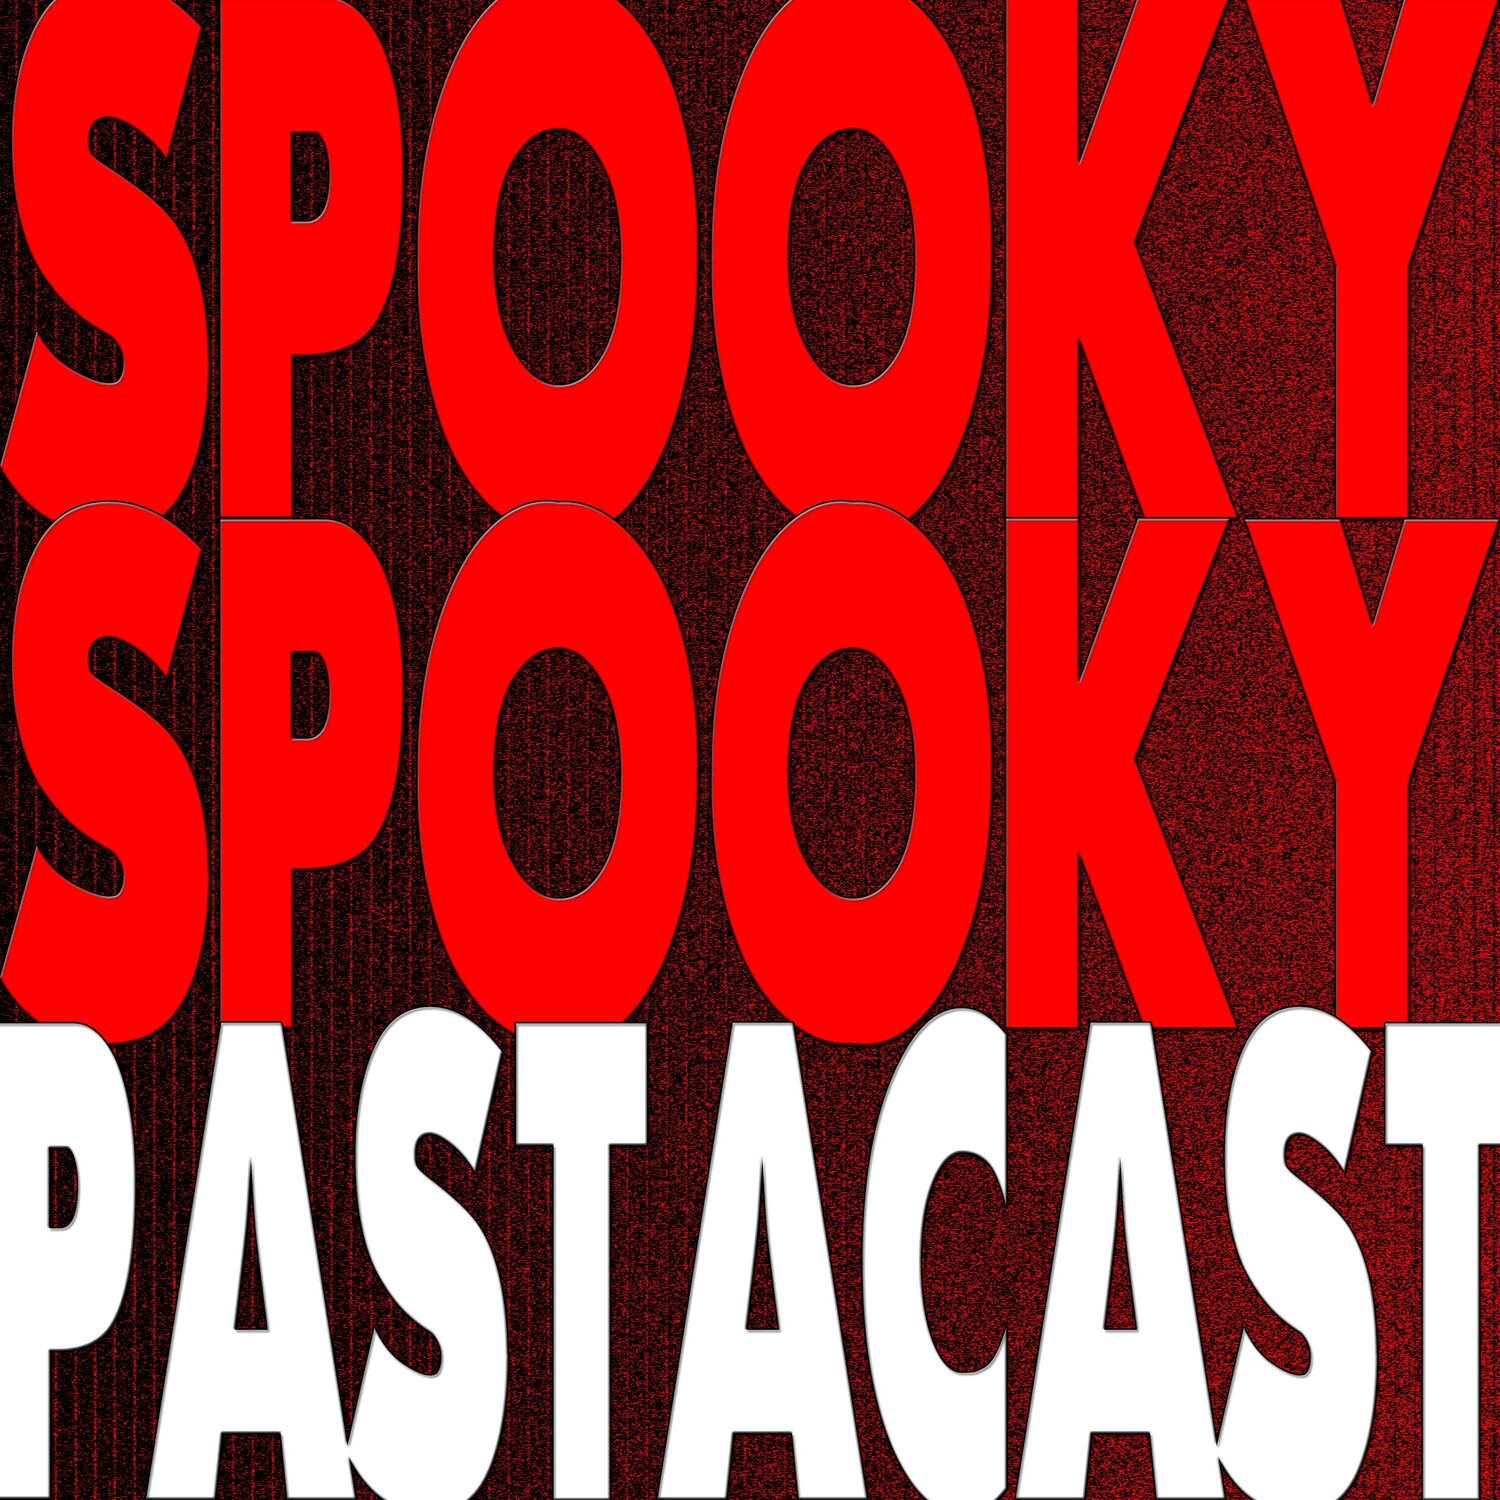 55: Spooky Spooky Pastacast - 3 - The Poo-Ghost Part 3